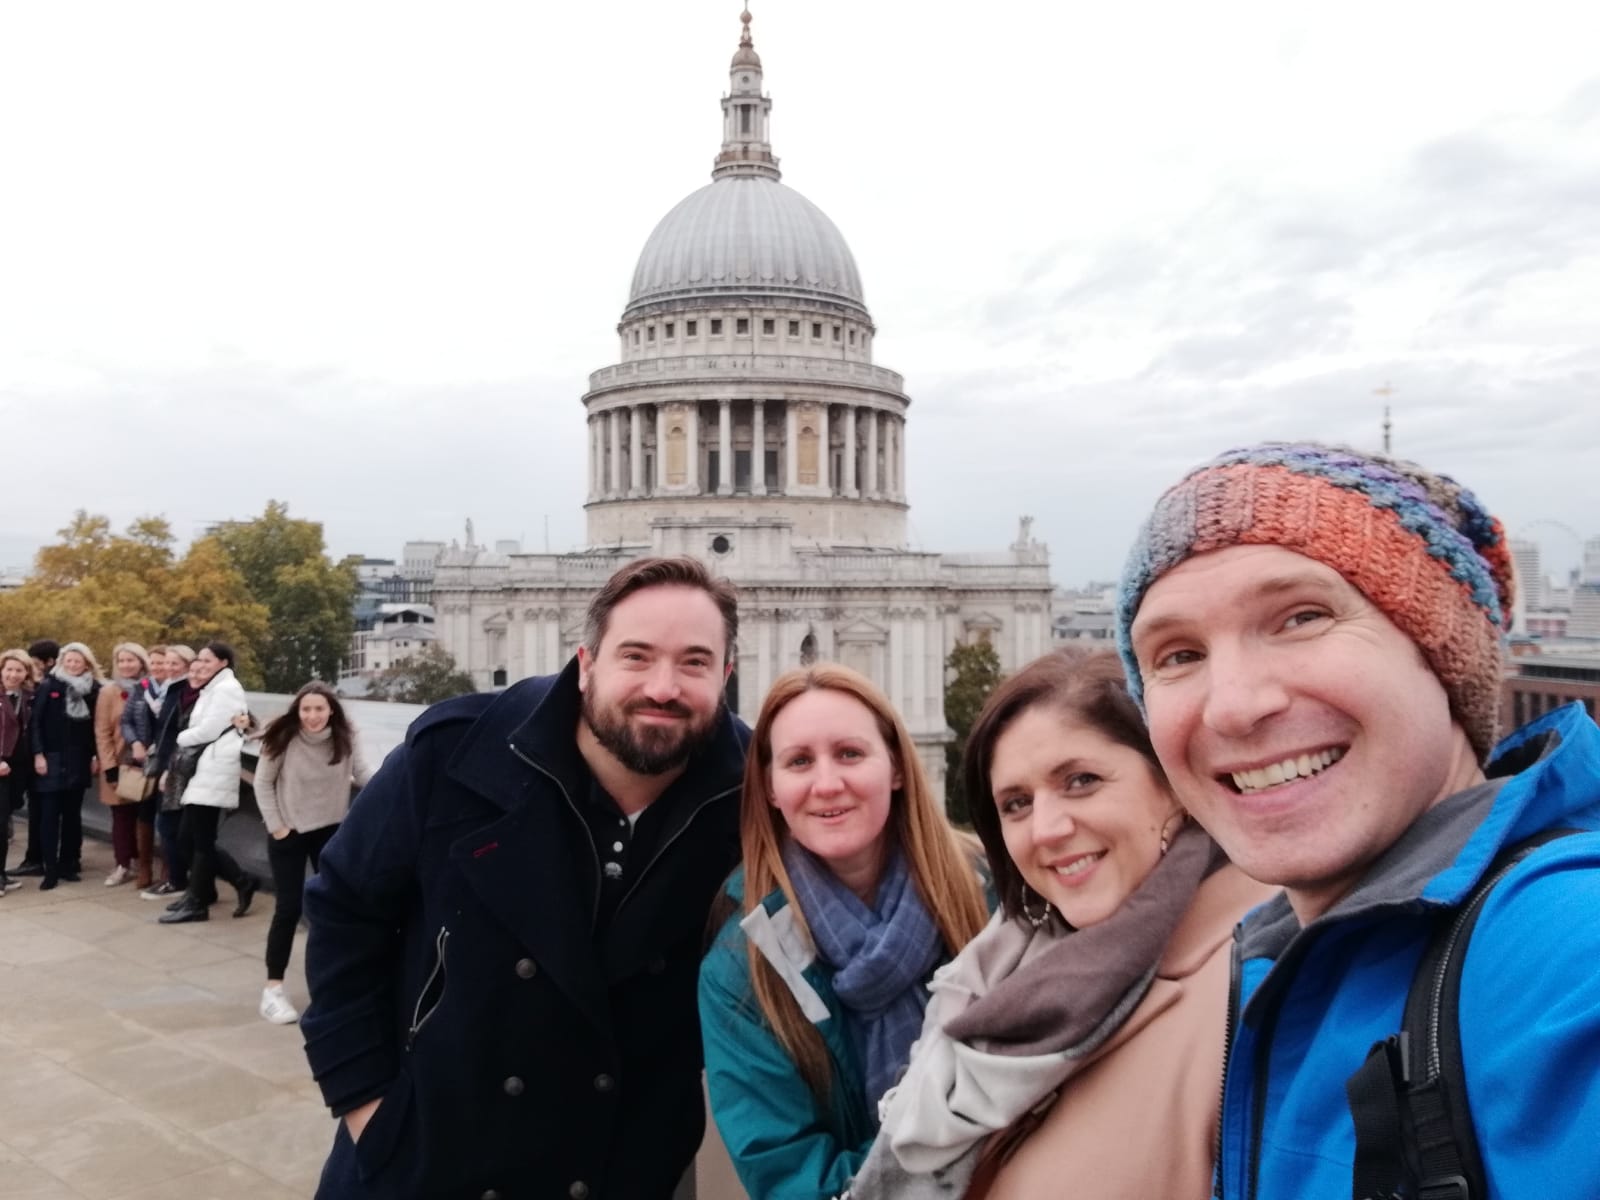 Us with friends overlooking St Paul's Cathedral, London